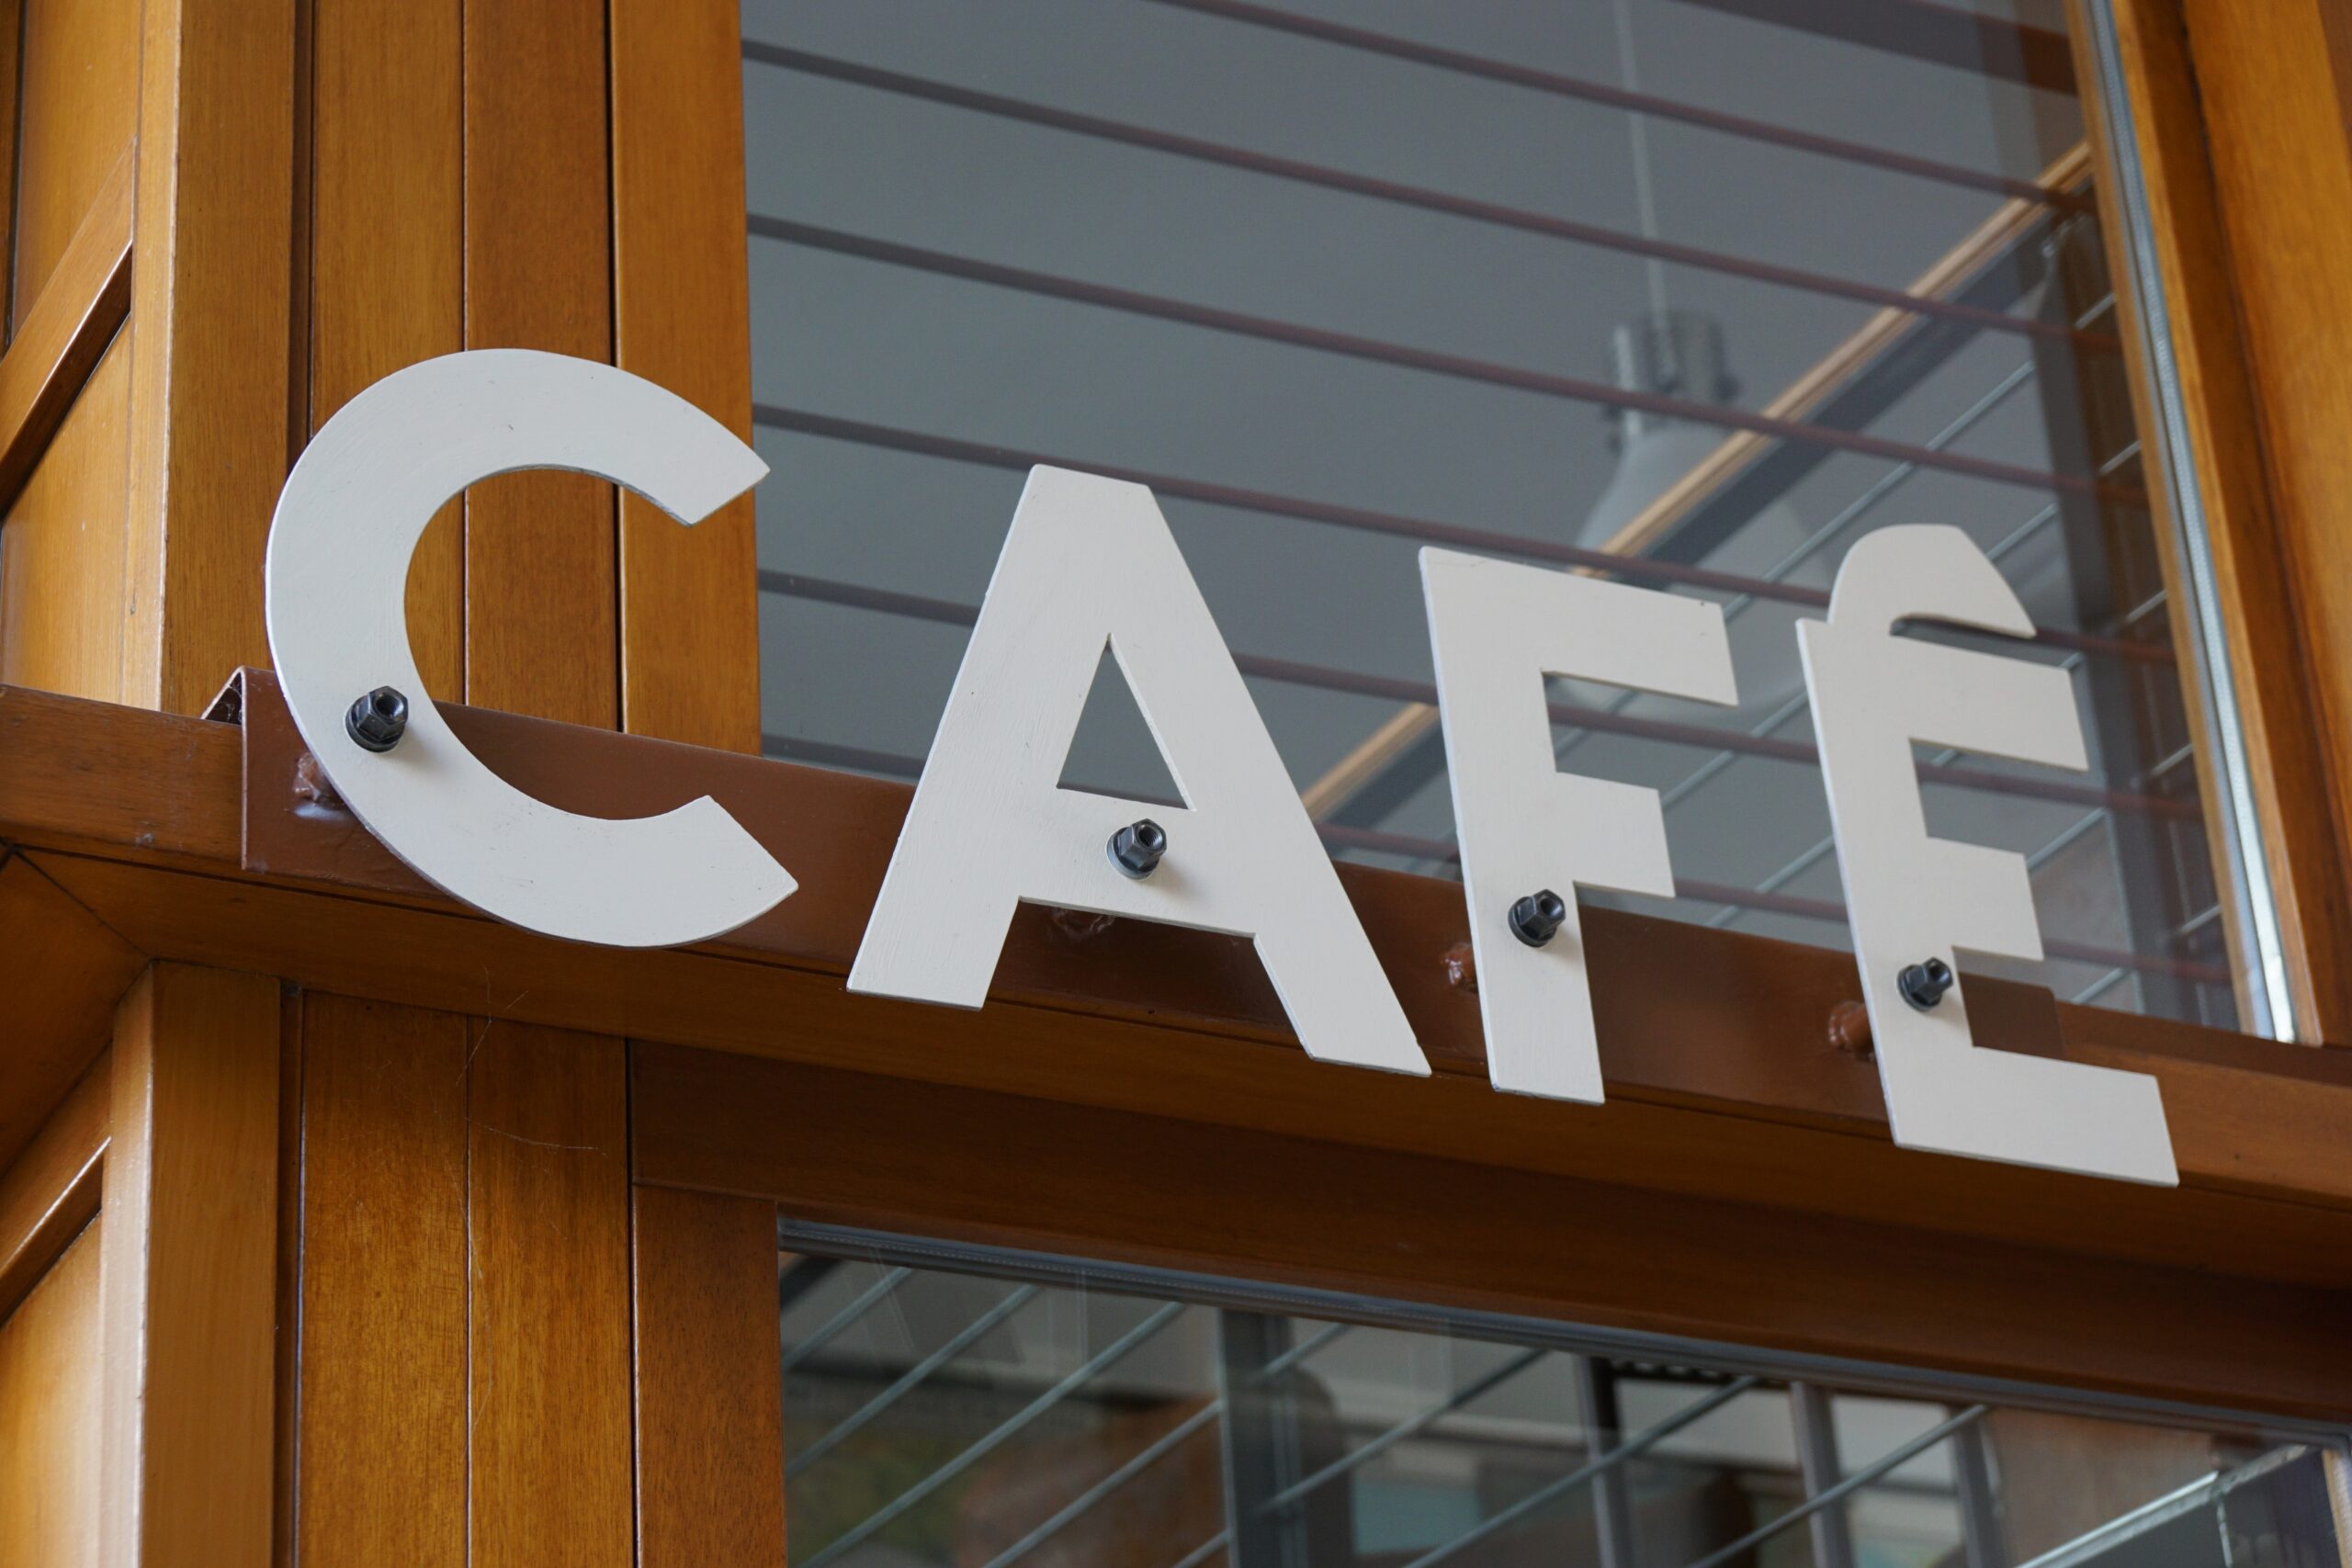 Closeup of a cafe sign on fixed on a wooden beam of a shop